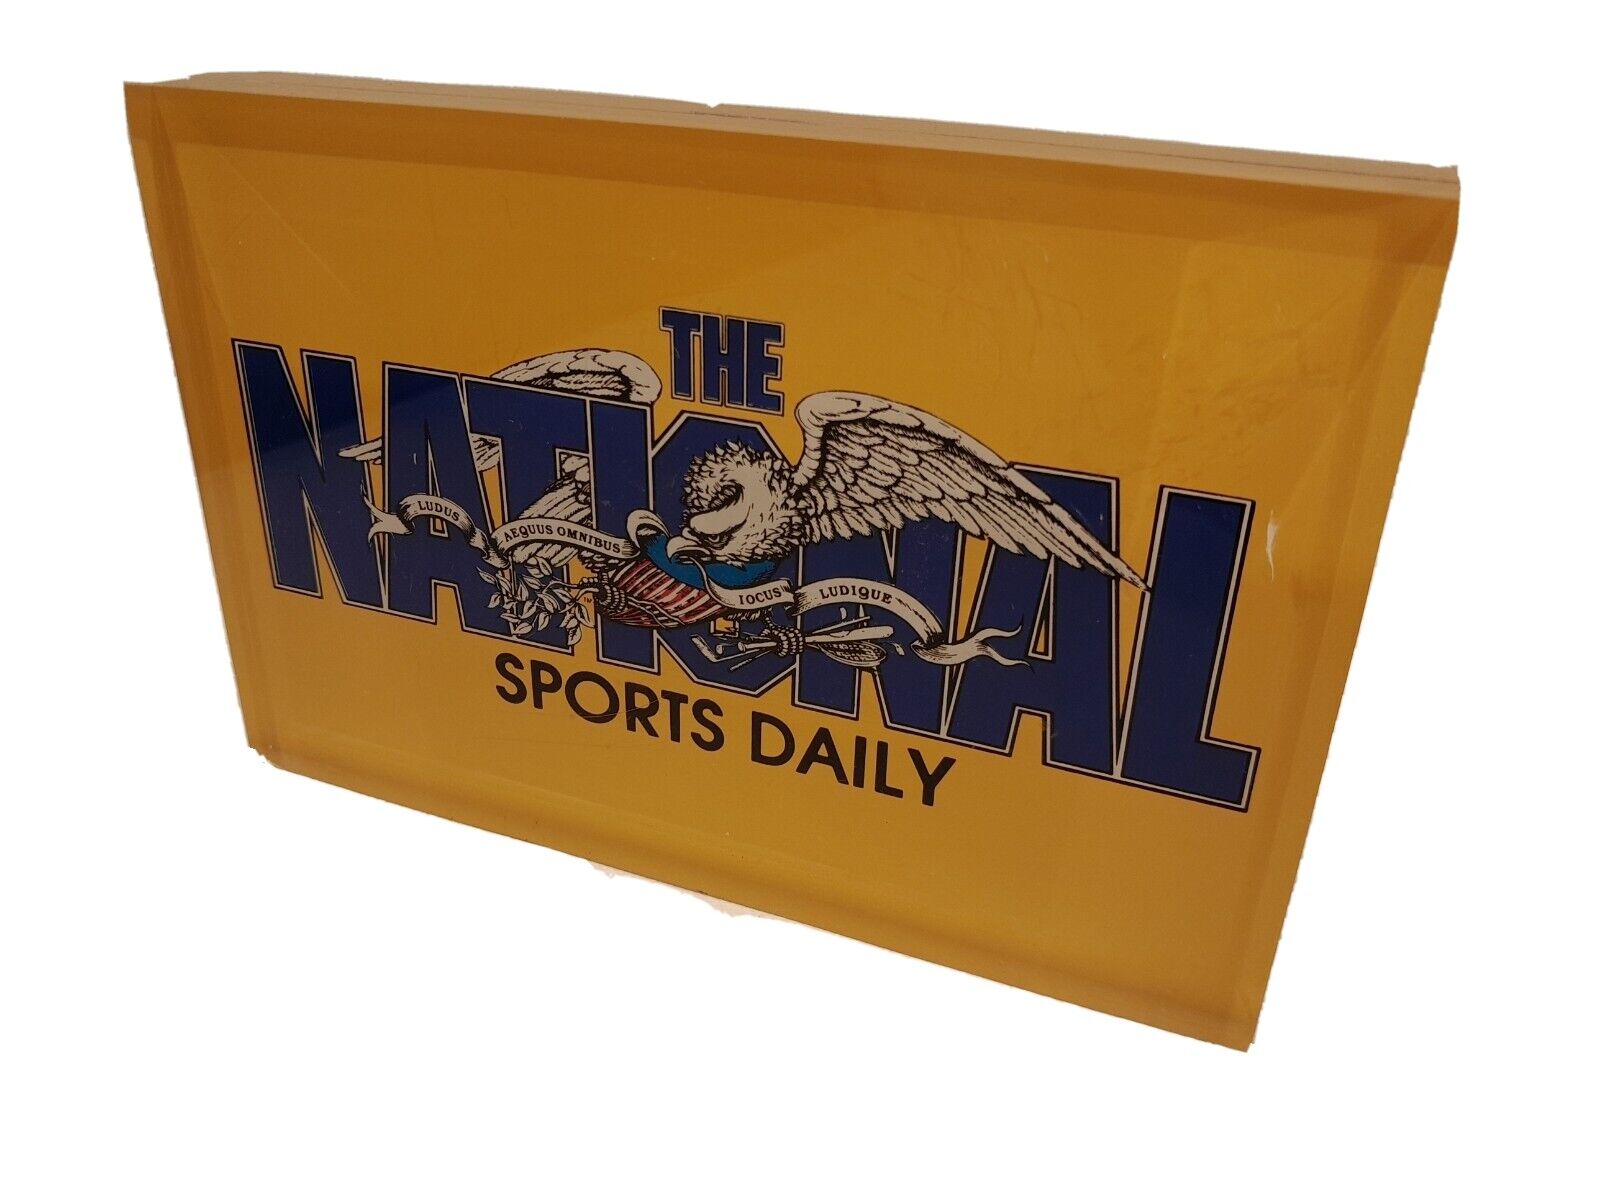 NATIONAL SPORTS DAILY Logo Lucite Acrylic Desk Shelf Decor Paperweight 2-Sided